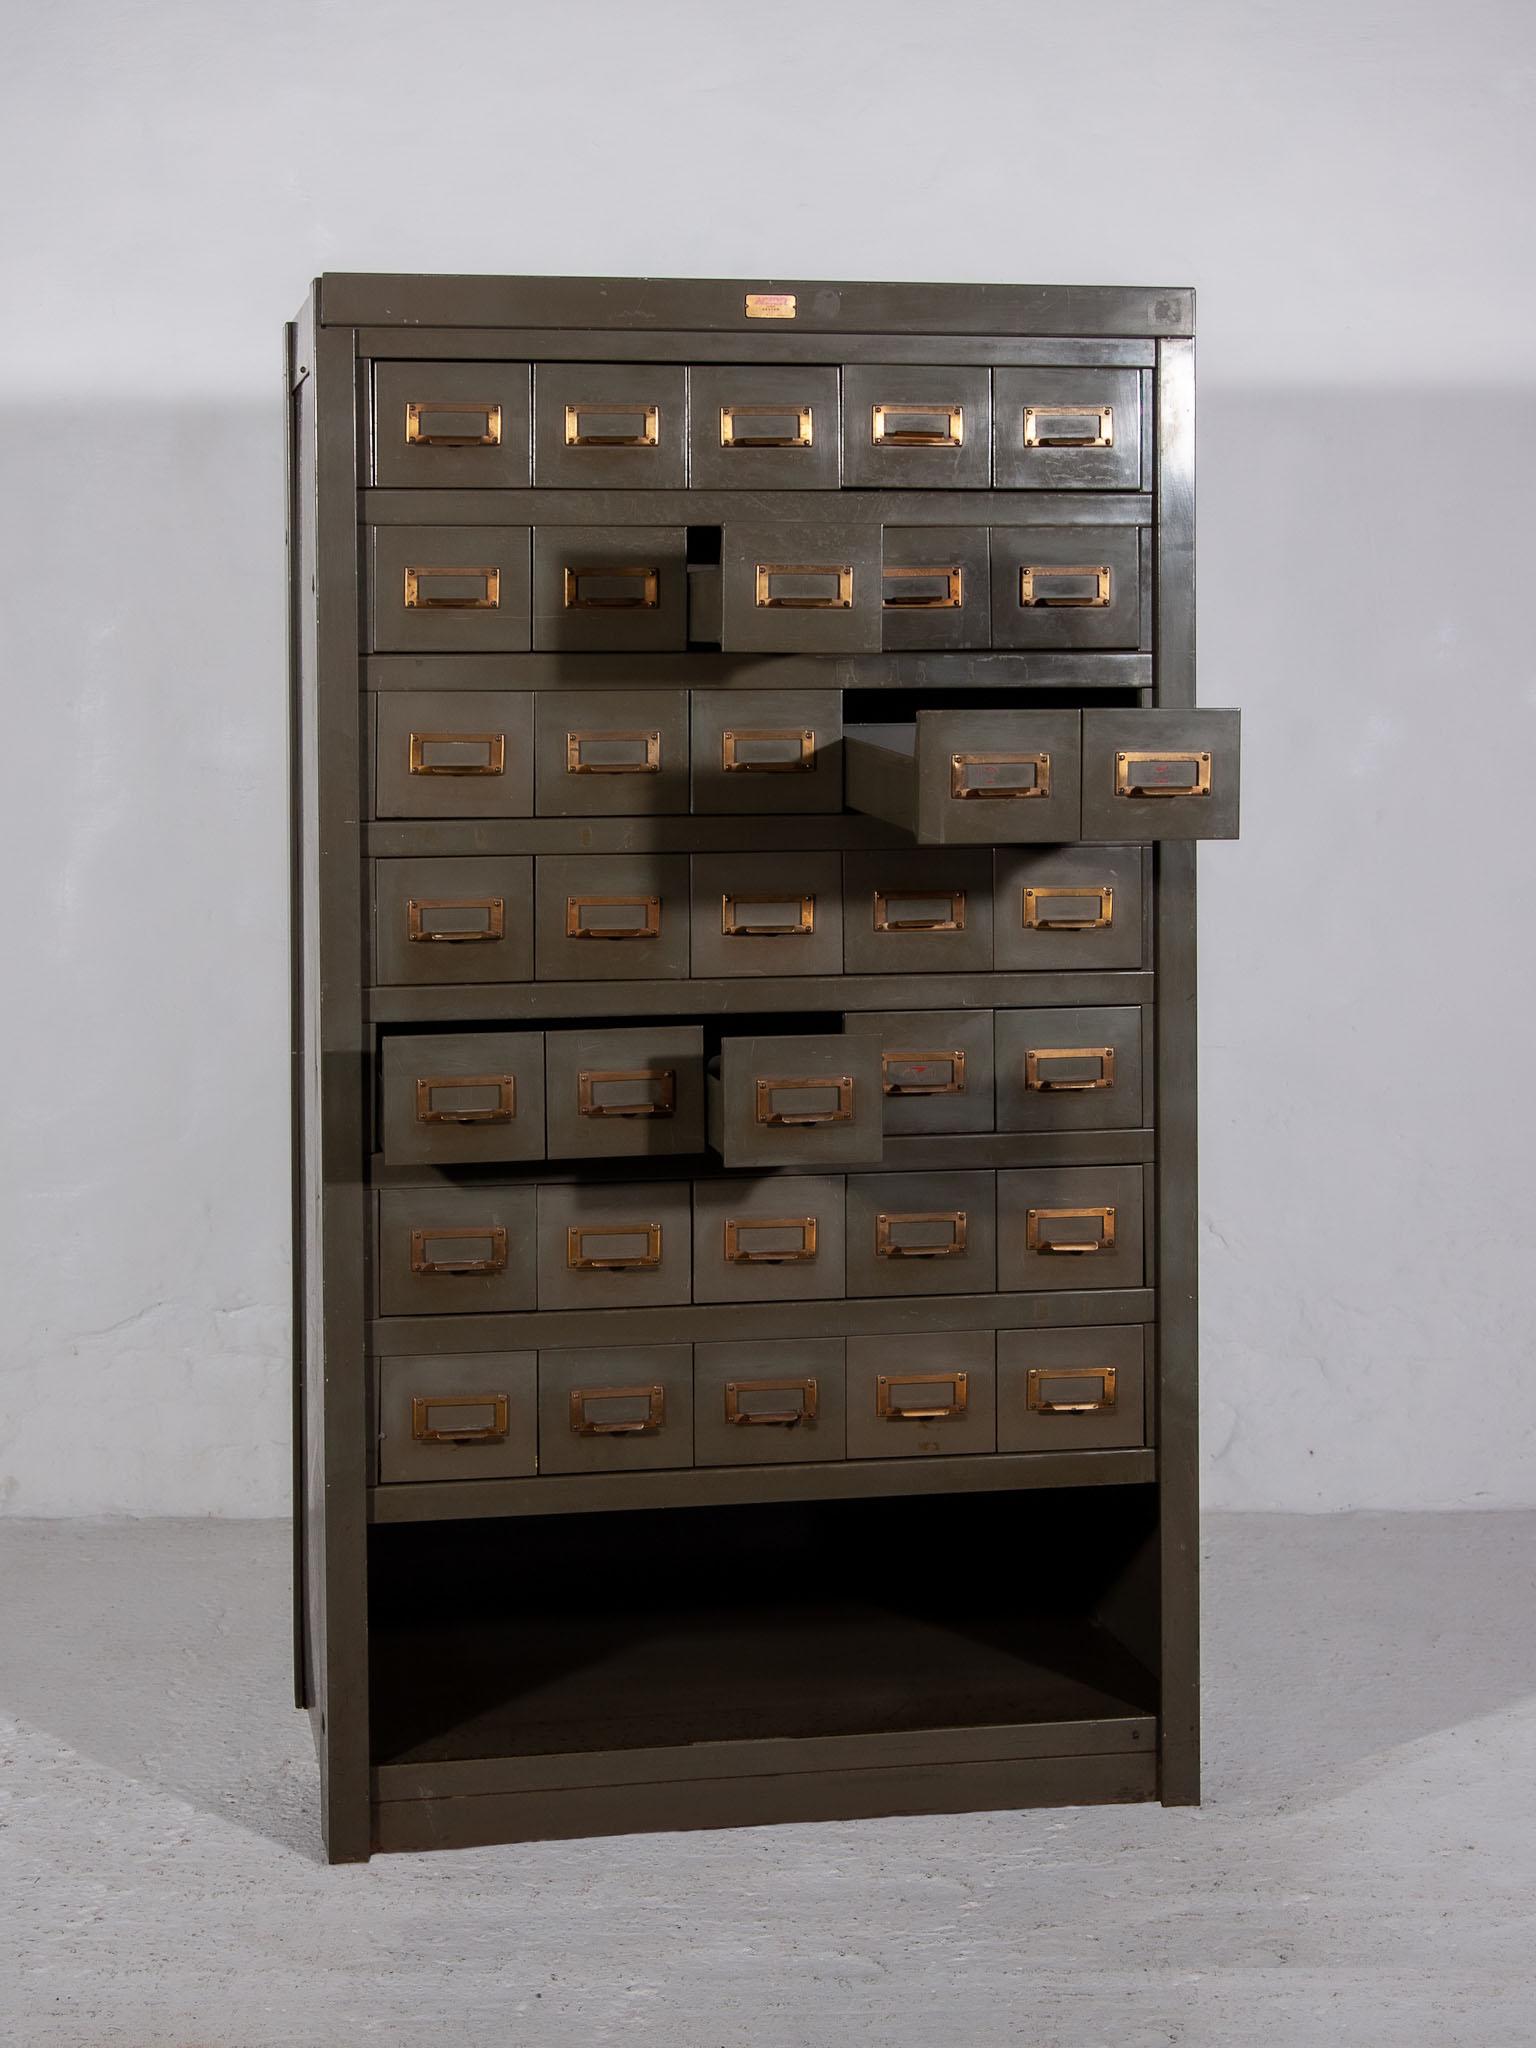 Belgian Industrial Chest of Drawers, 1940s by Acior Maison Desoer Liège, Belgium For Sale